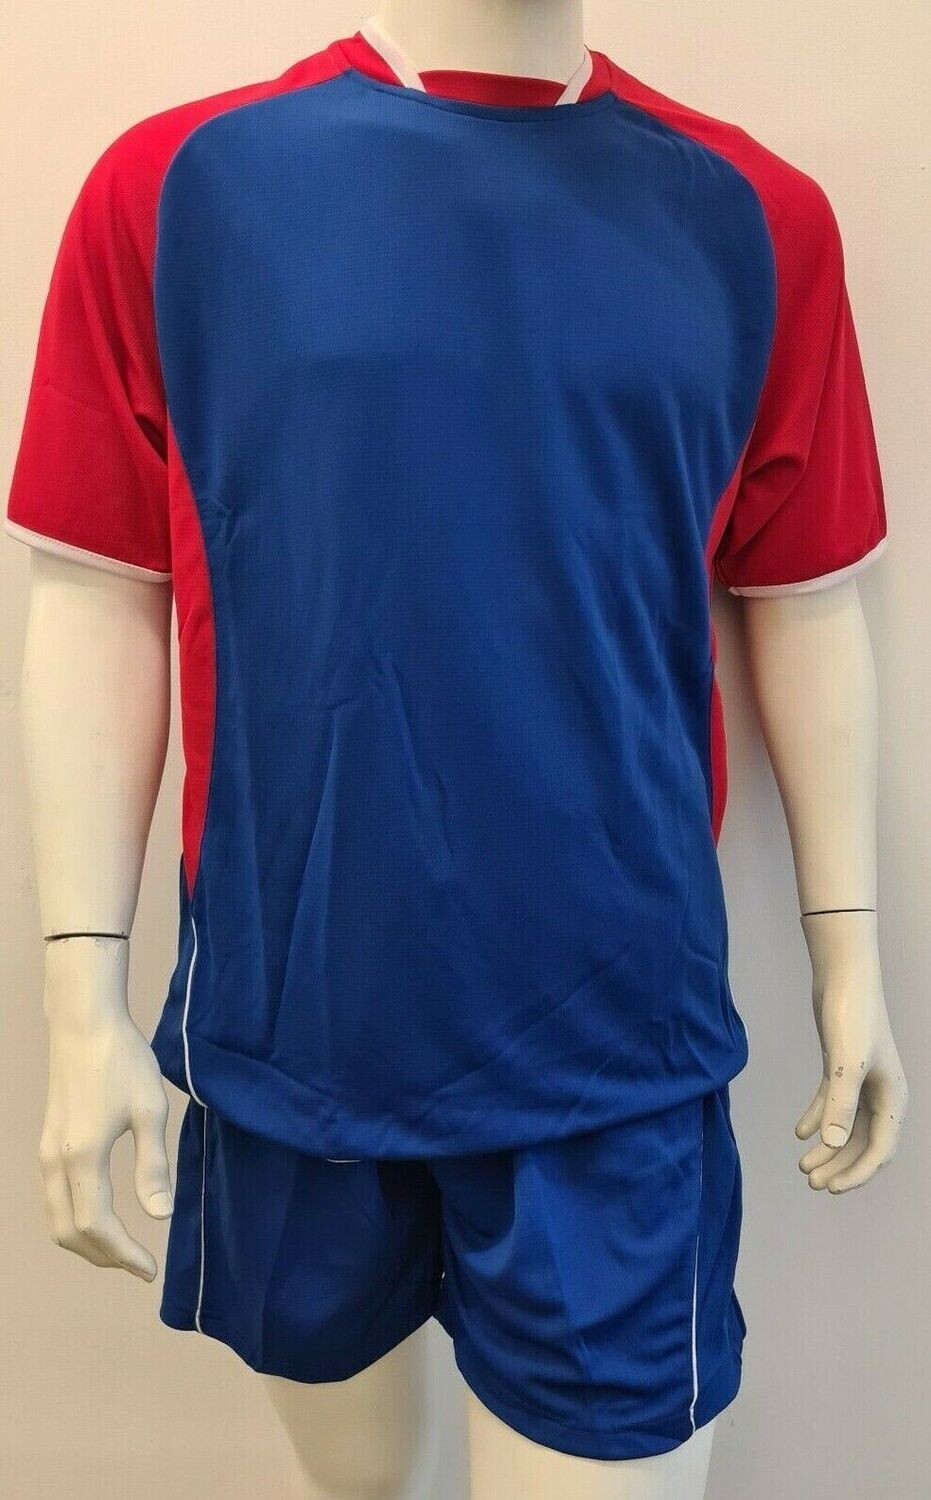 Sports / Football Kits Clothing for sport. Red/Blue Large